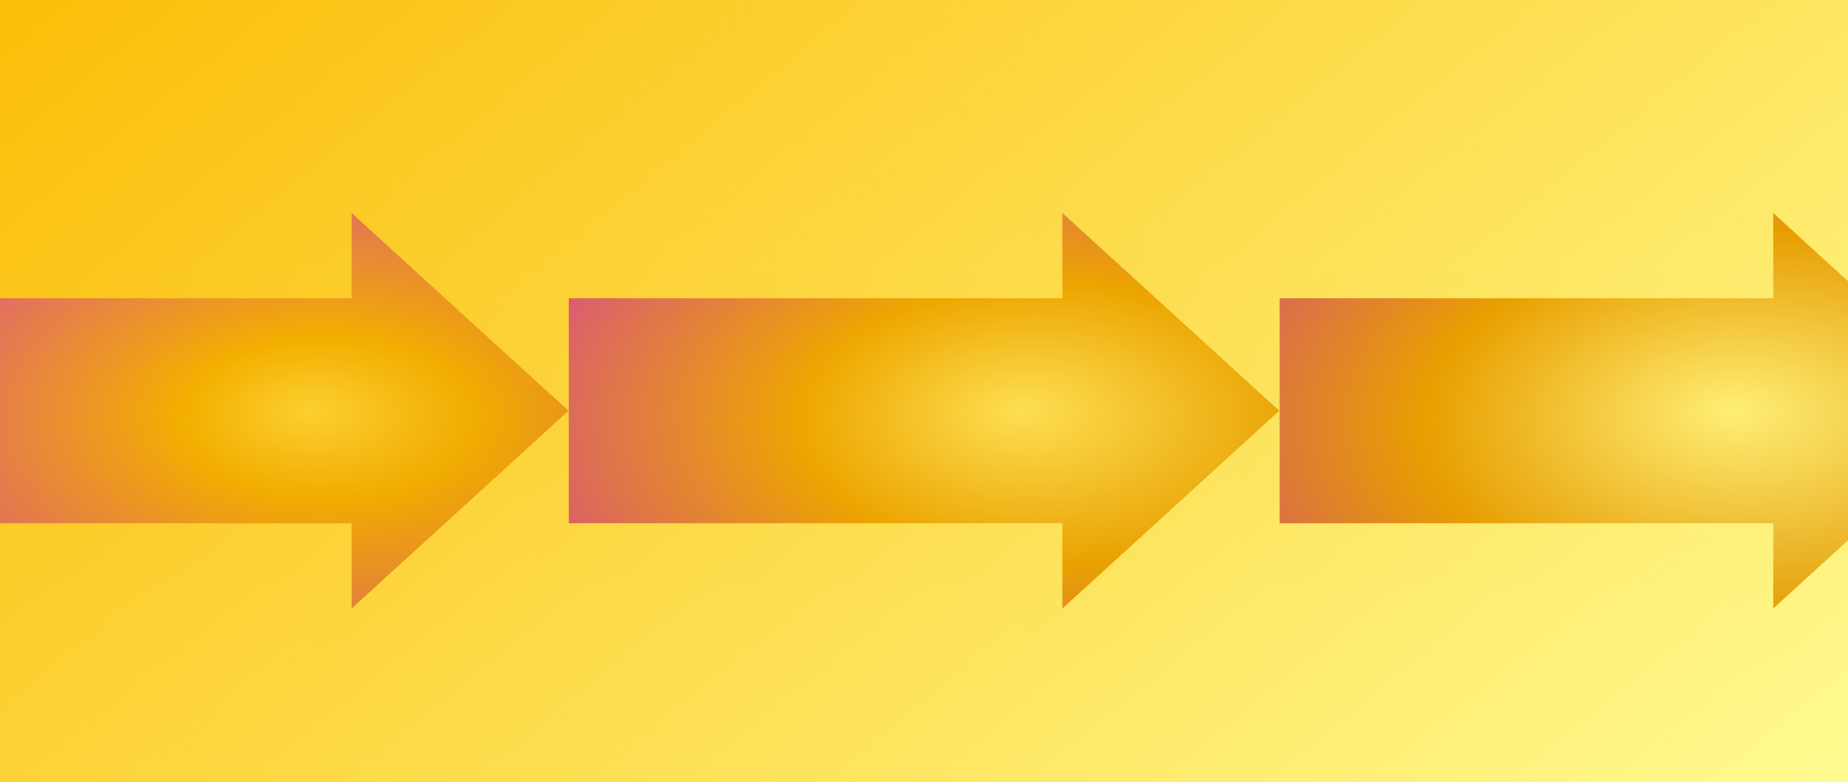 Three orange arrows pointing right next to each other on a yellow background.